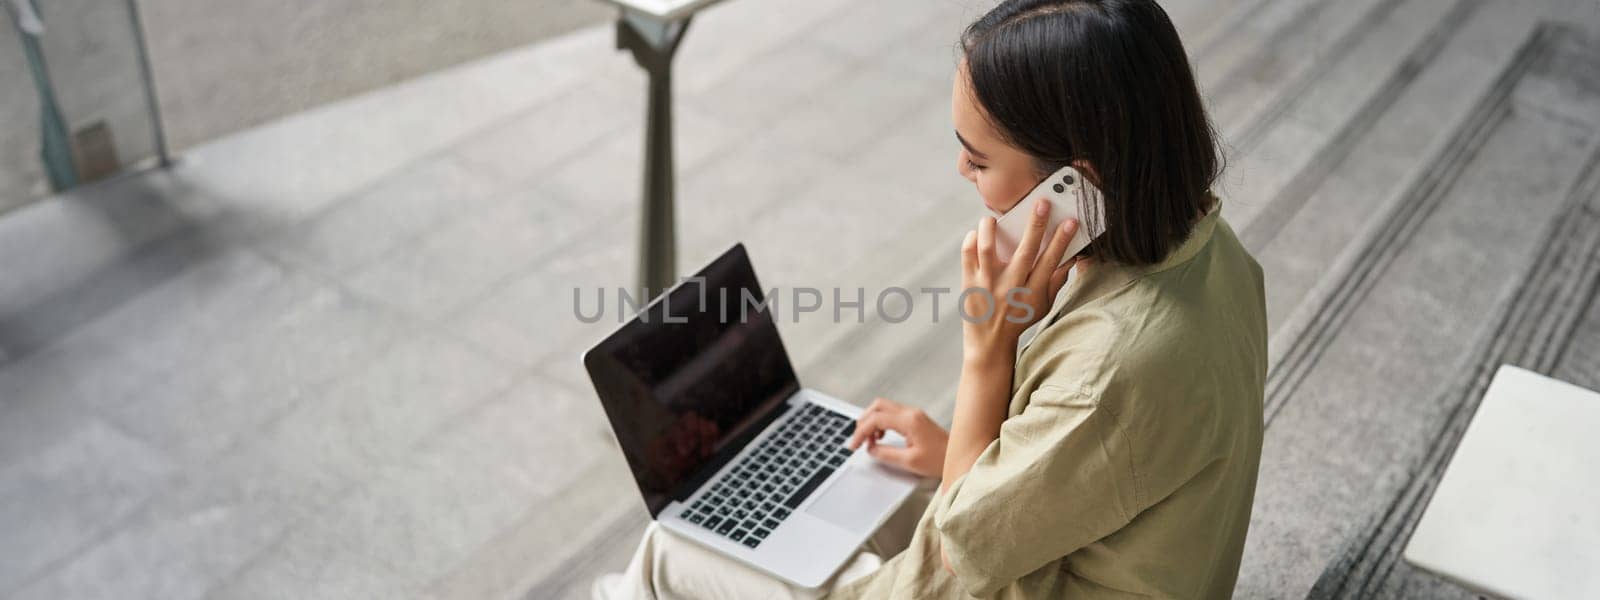 Portrait of asian girl, student sits on stairs with laptop, talks on mobile phone. Young woman makes a telephone call while working on computer.